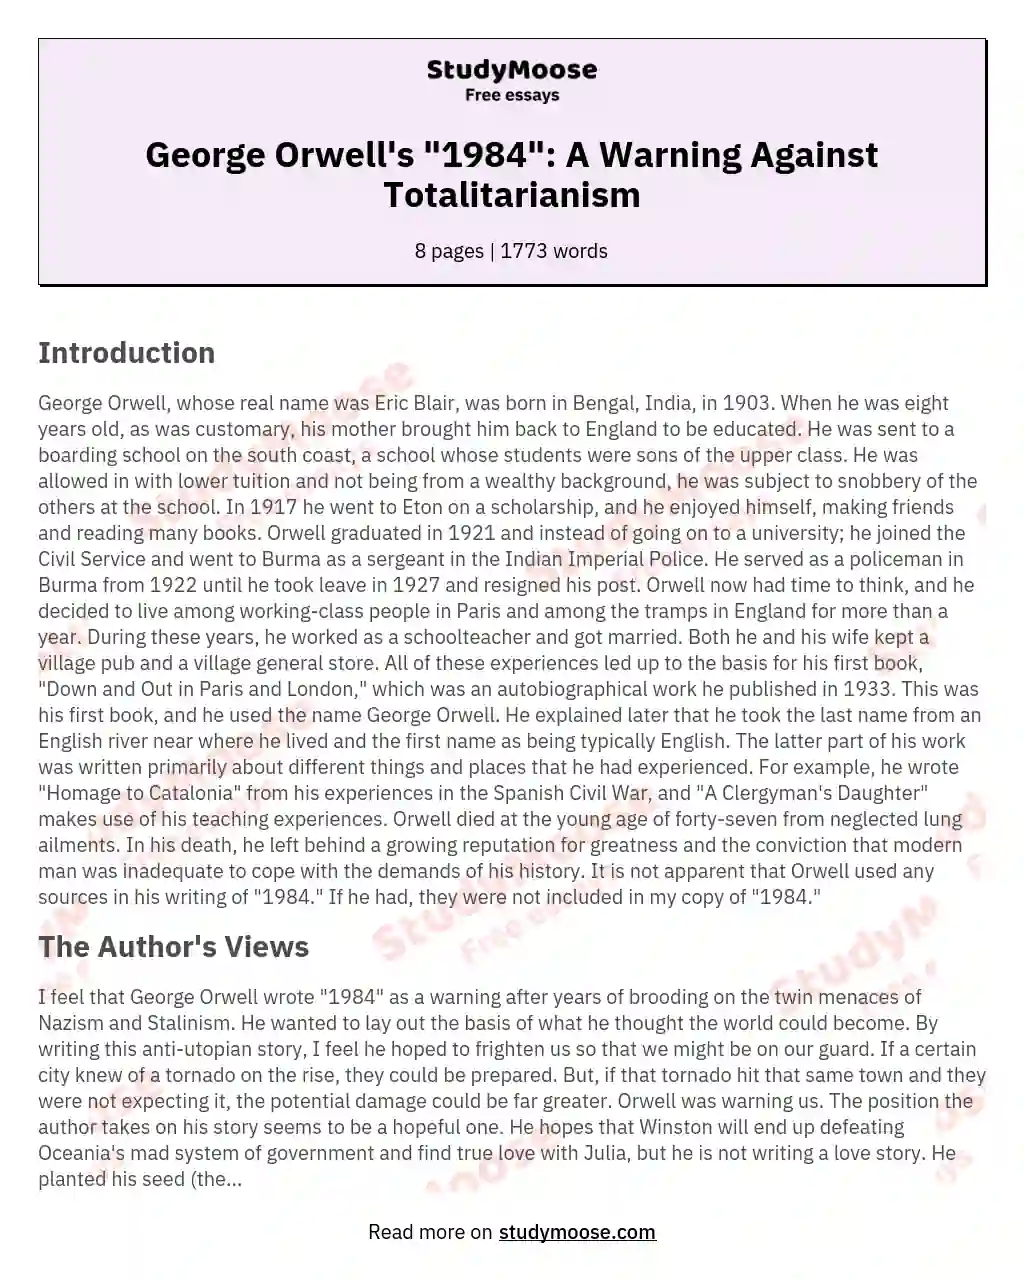 George Orwell's "1984": A Warning Against Totalitarianism essay